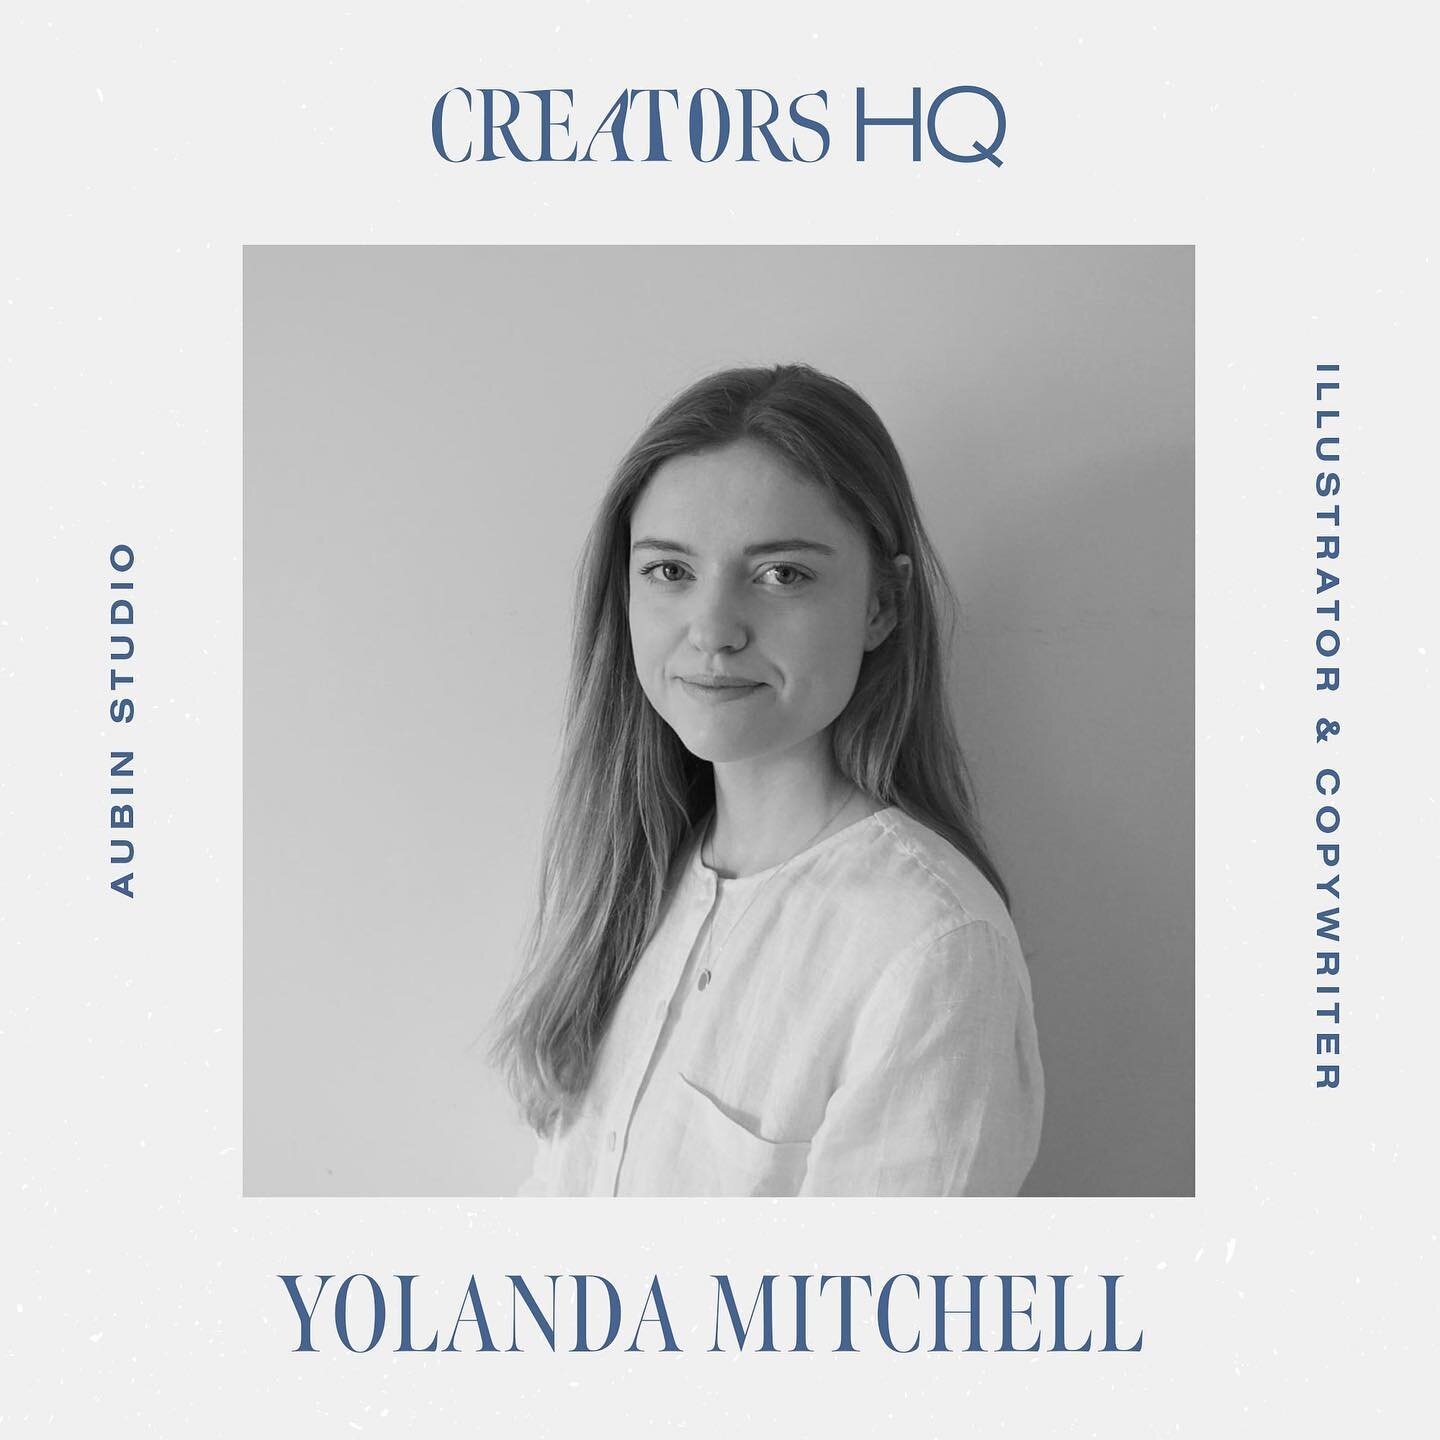 Couldn&rsquo;t wait to share our latest creator. Yolanda is the Founder and Artist behind @aubin.studio,  a creative business selling fine art prints. 

She is inspired by the wonders of plants and our natural world, as well as island scenes in Jerse